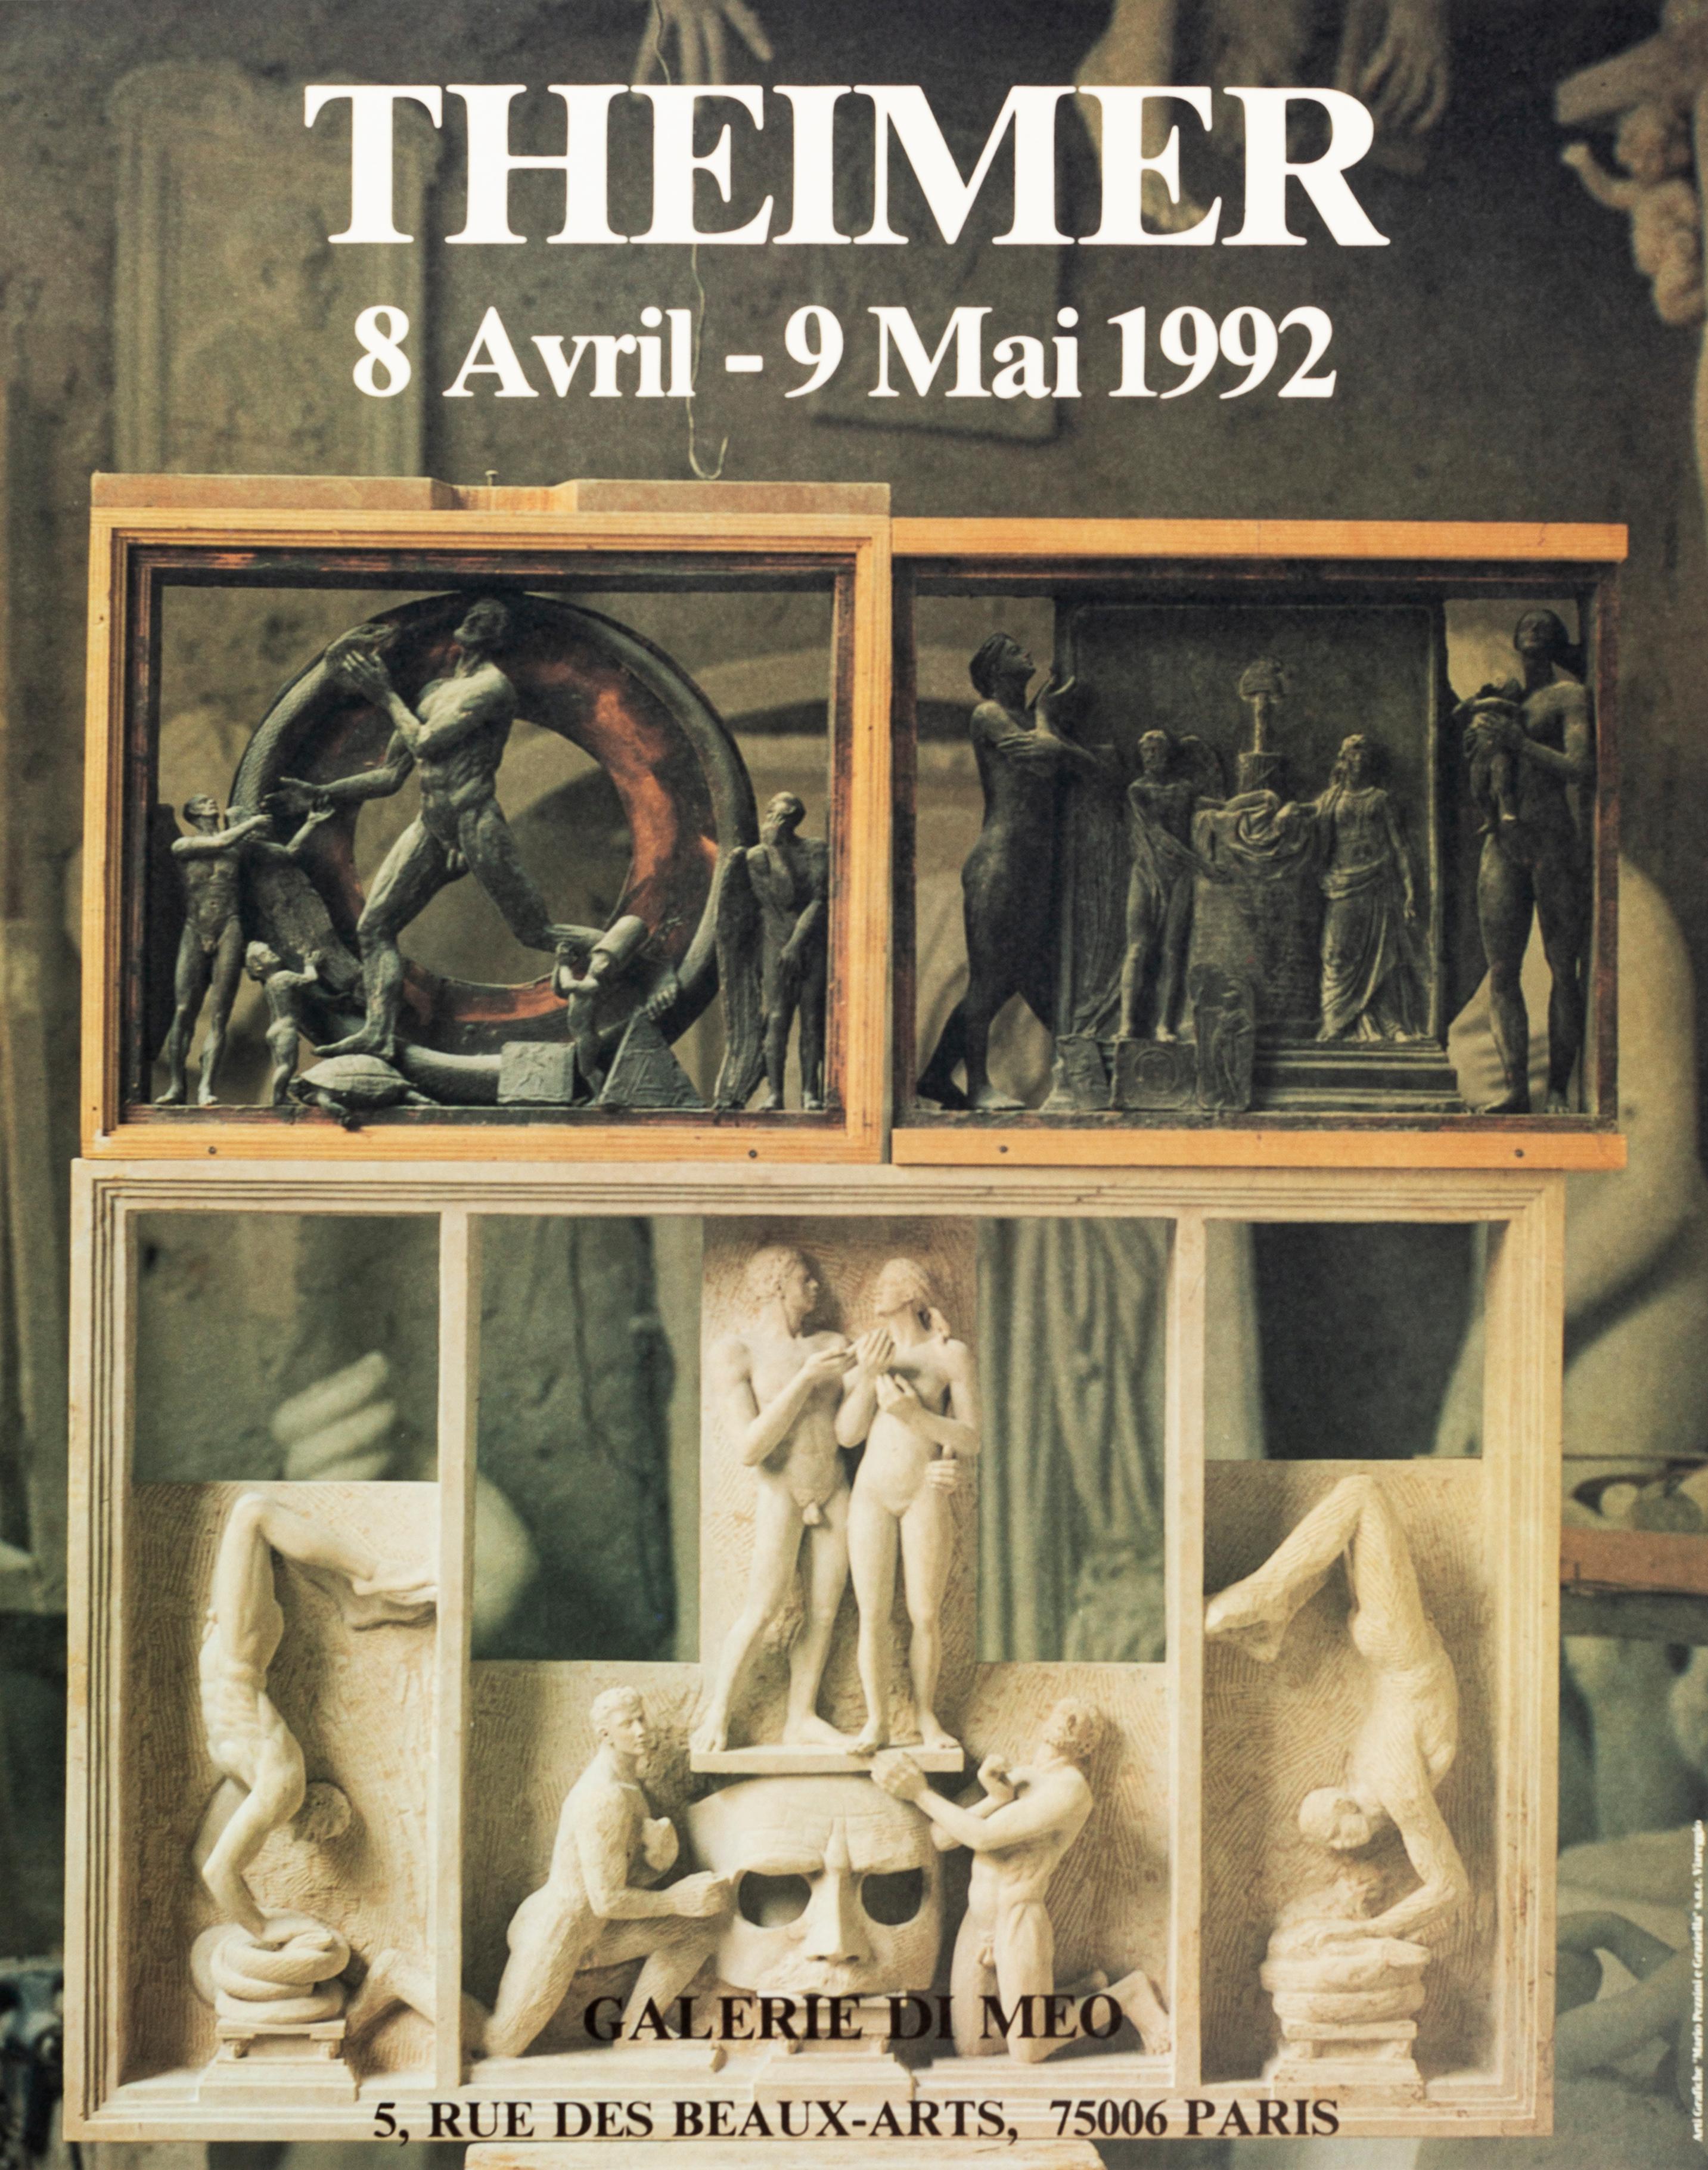 Theimer - Galerie Di Meo - Vintage Poster 1992